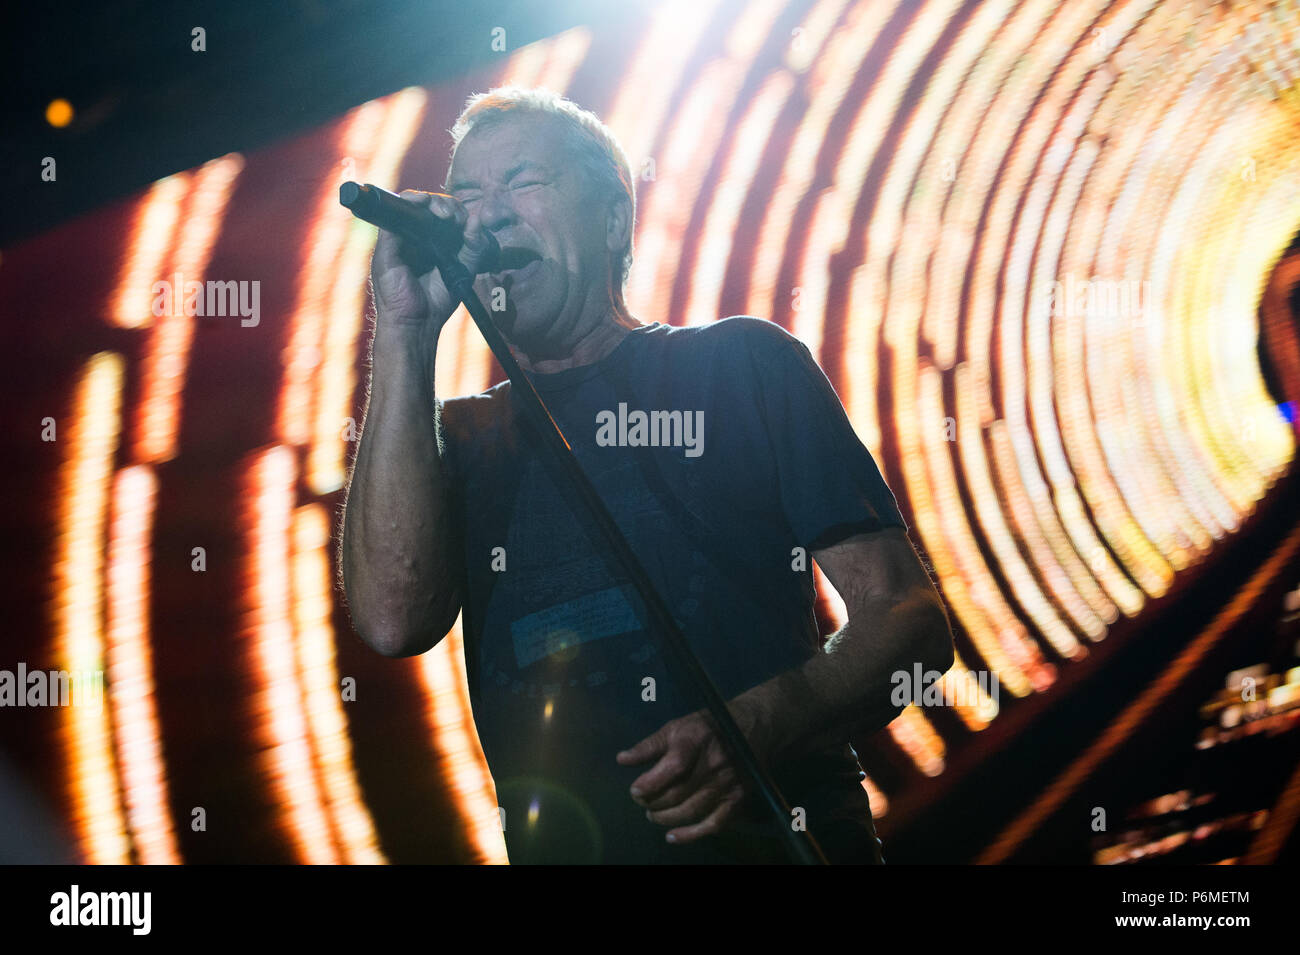 Krakow, Poland. 1st July, 2018. Deep Purple vocalist, Ian Gillan performs.Deep purple band performs at Tauron Arena Krakow as part of the farewell tour, The Long Goodbye Tour. Credit: Omar Marques/SOPA Images/ZUMA Wire/Alamy Live News Stock Photo